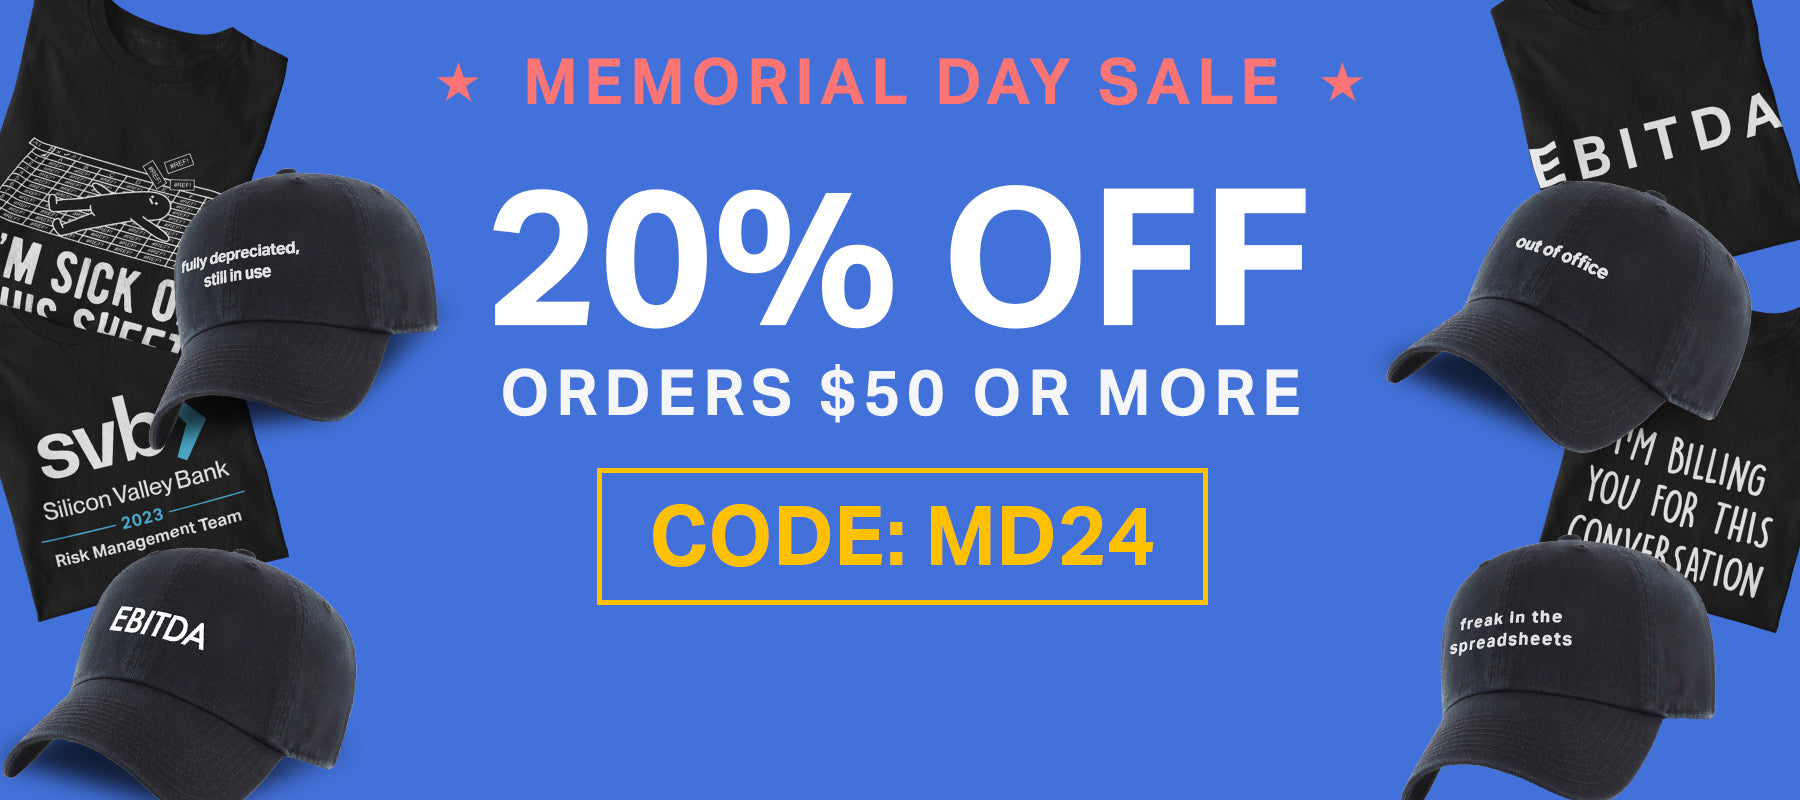 Memorial Day Sale - 20% off orders $50 or more - code MD24